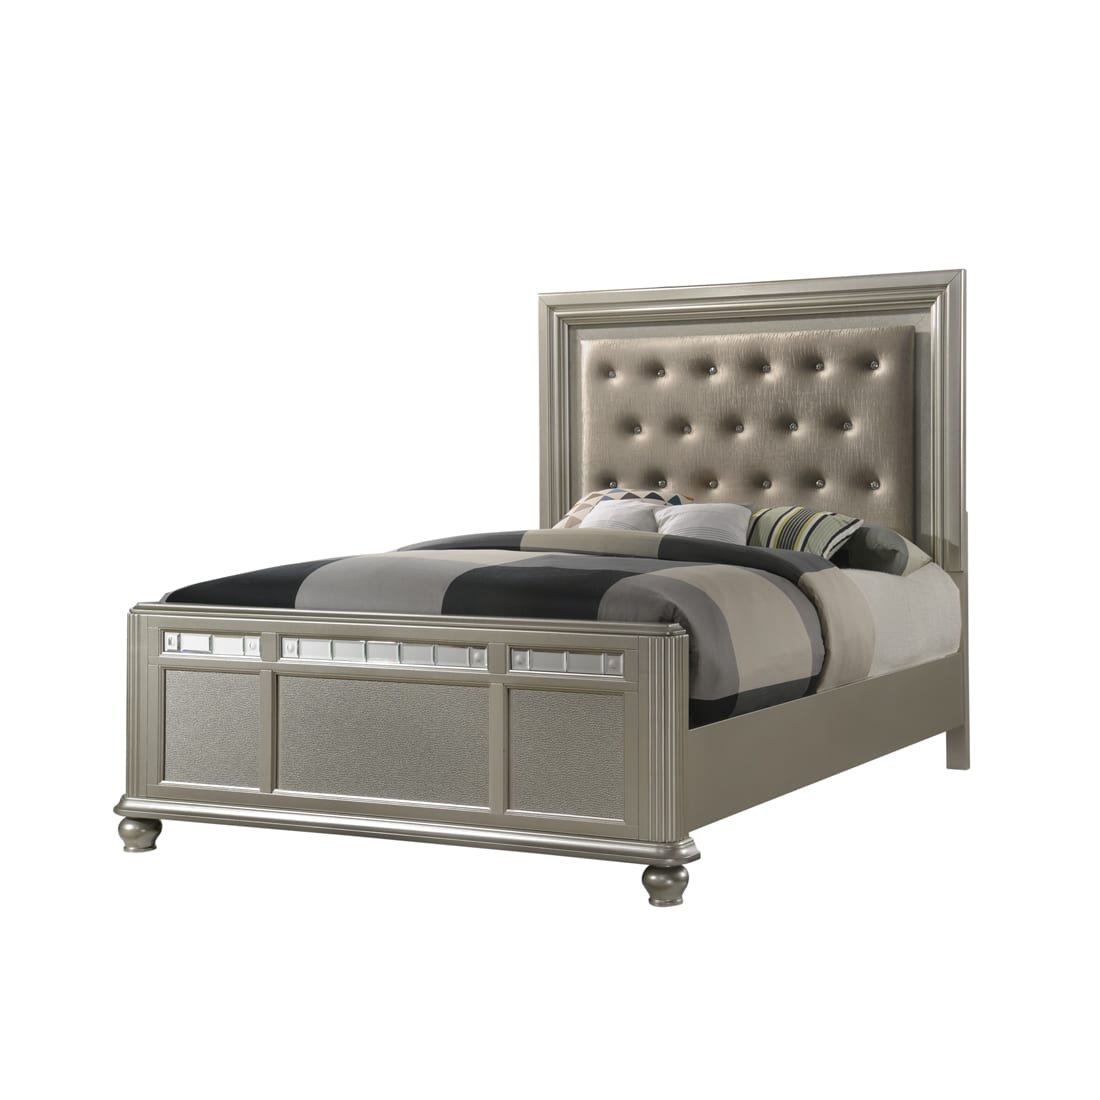 Gia Collection Queen Bed Conn S Homeplus, Gia Upholstered King Bed